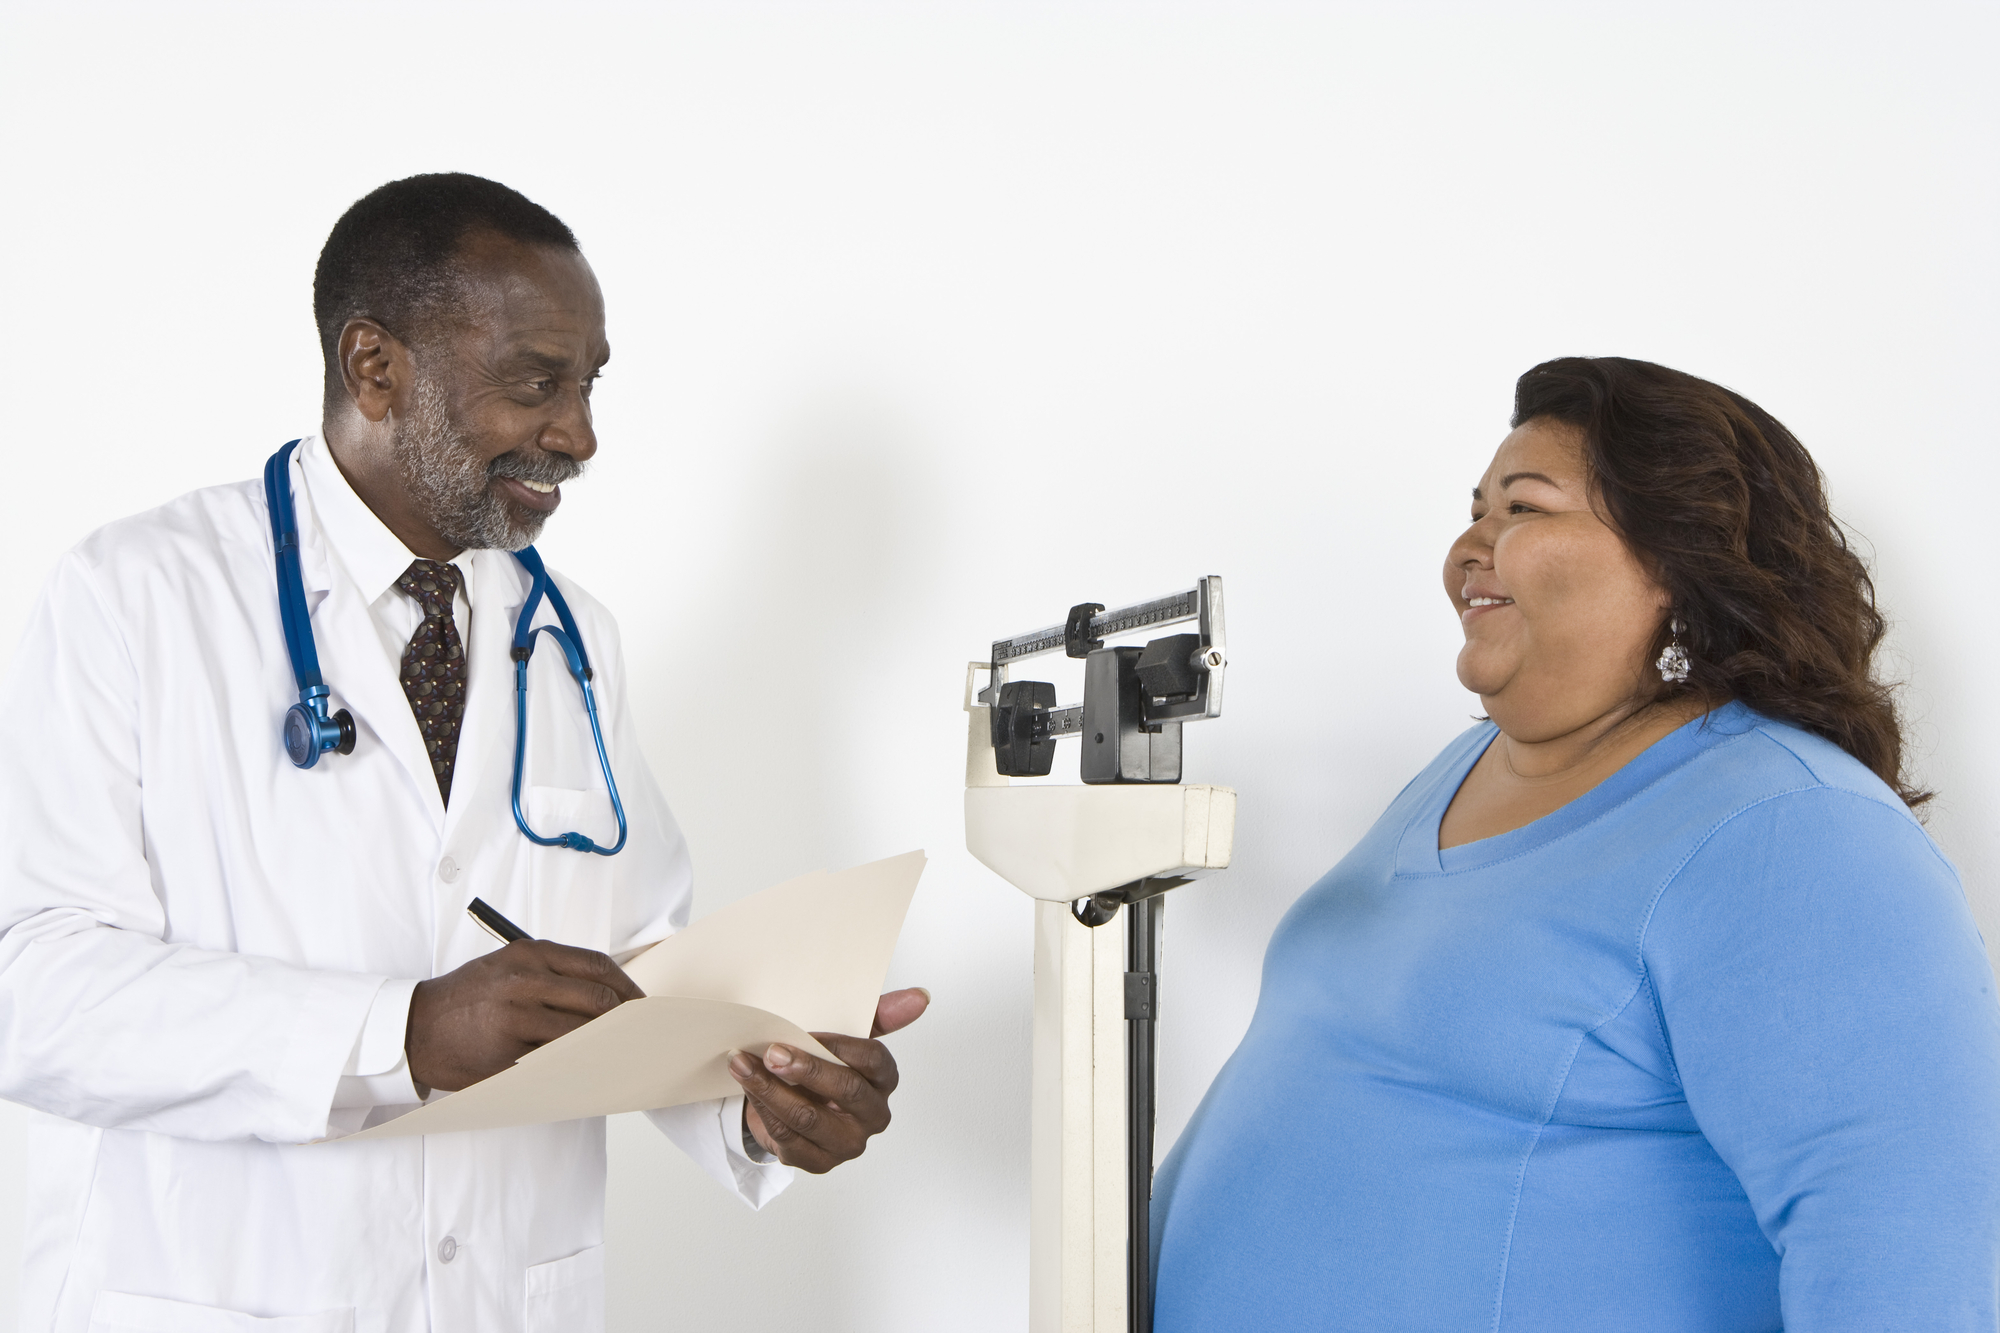 a doctor smiles at a patient while reading her weight off a scale